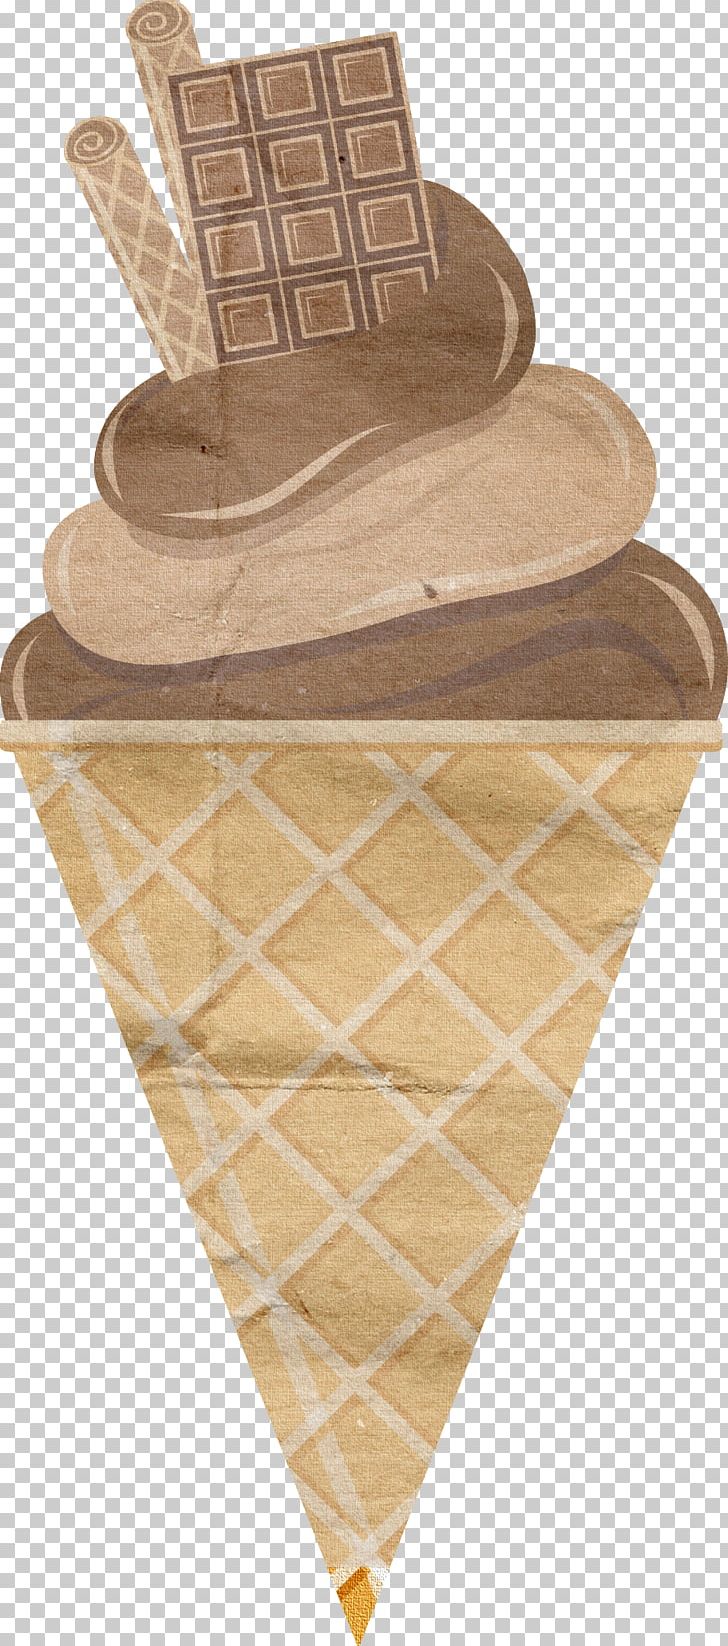 Ice Cream Cones Food PNG, Clipart, Cone, Confectionery, Food, Food Drinks, Ice Cream Free PNG Download